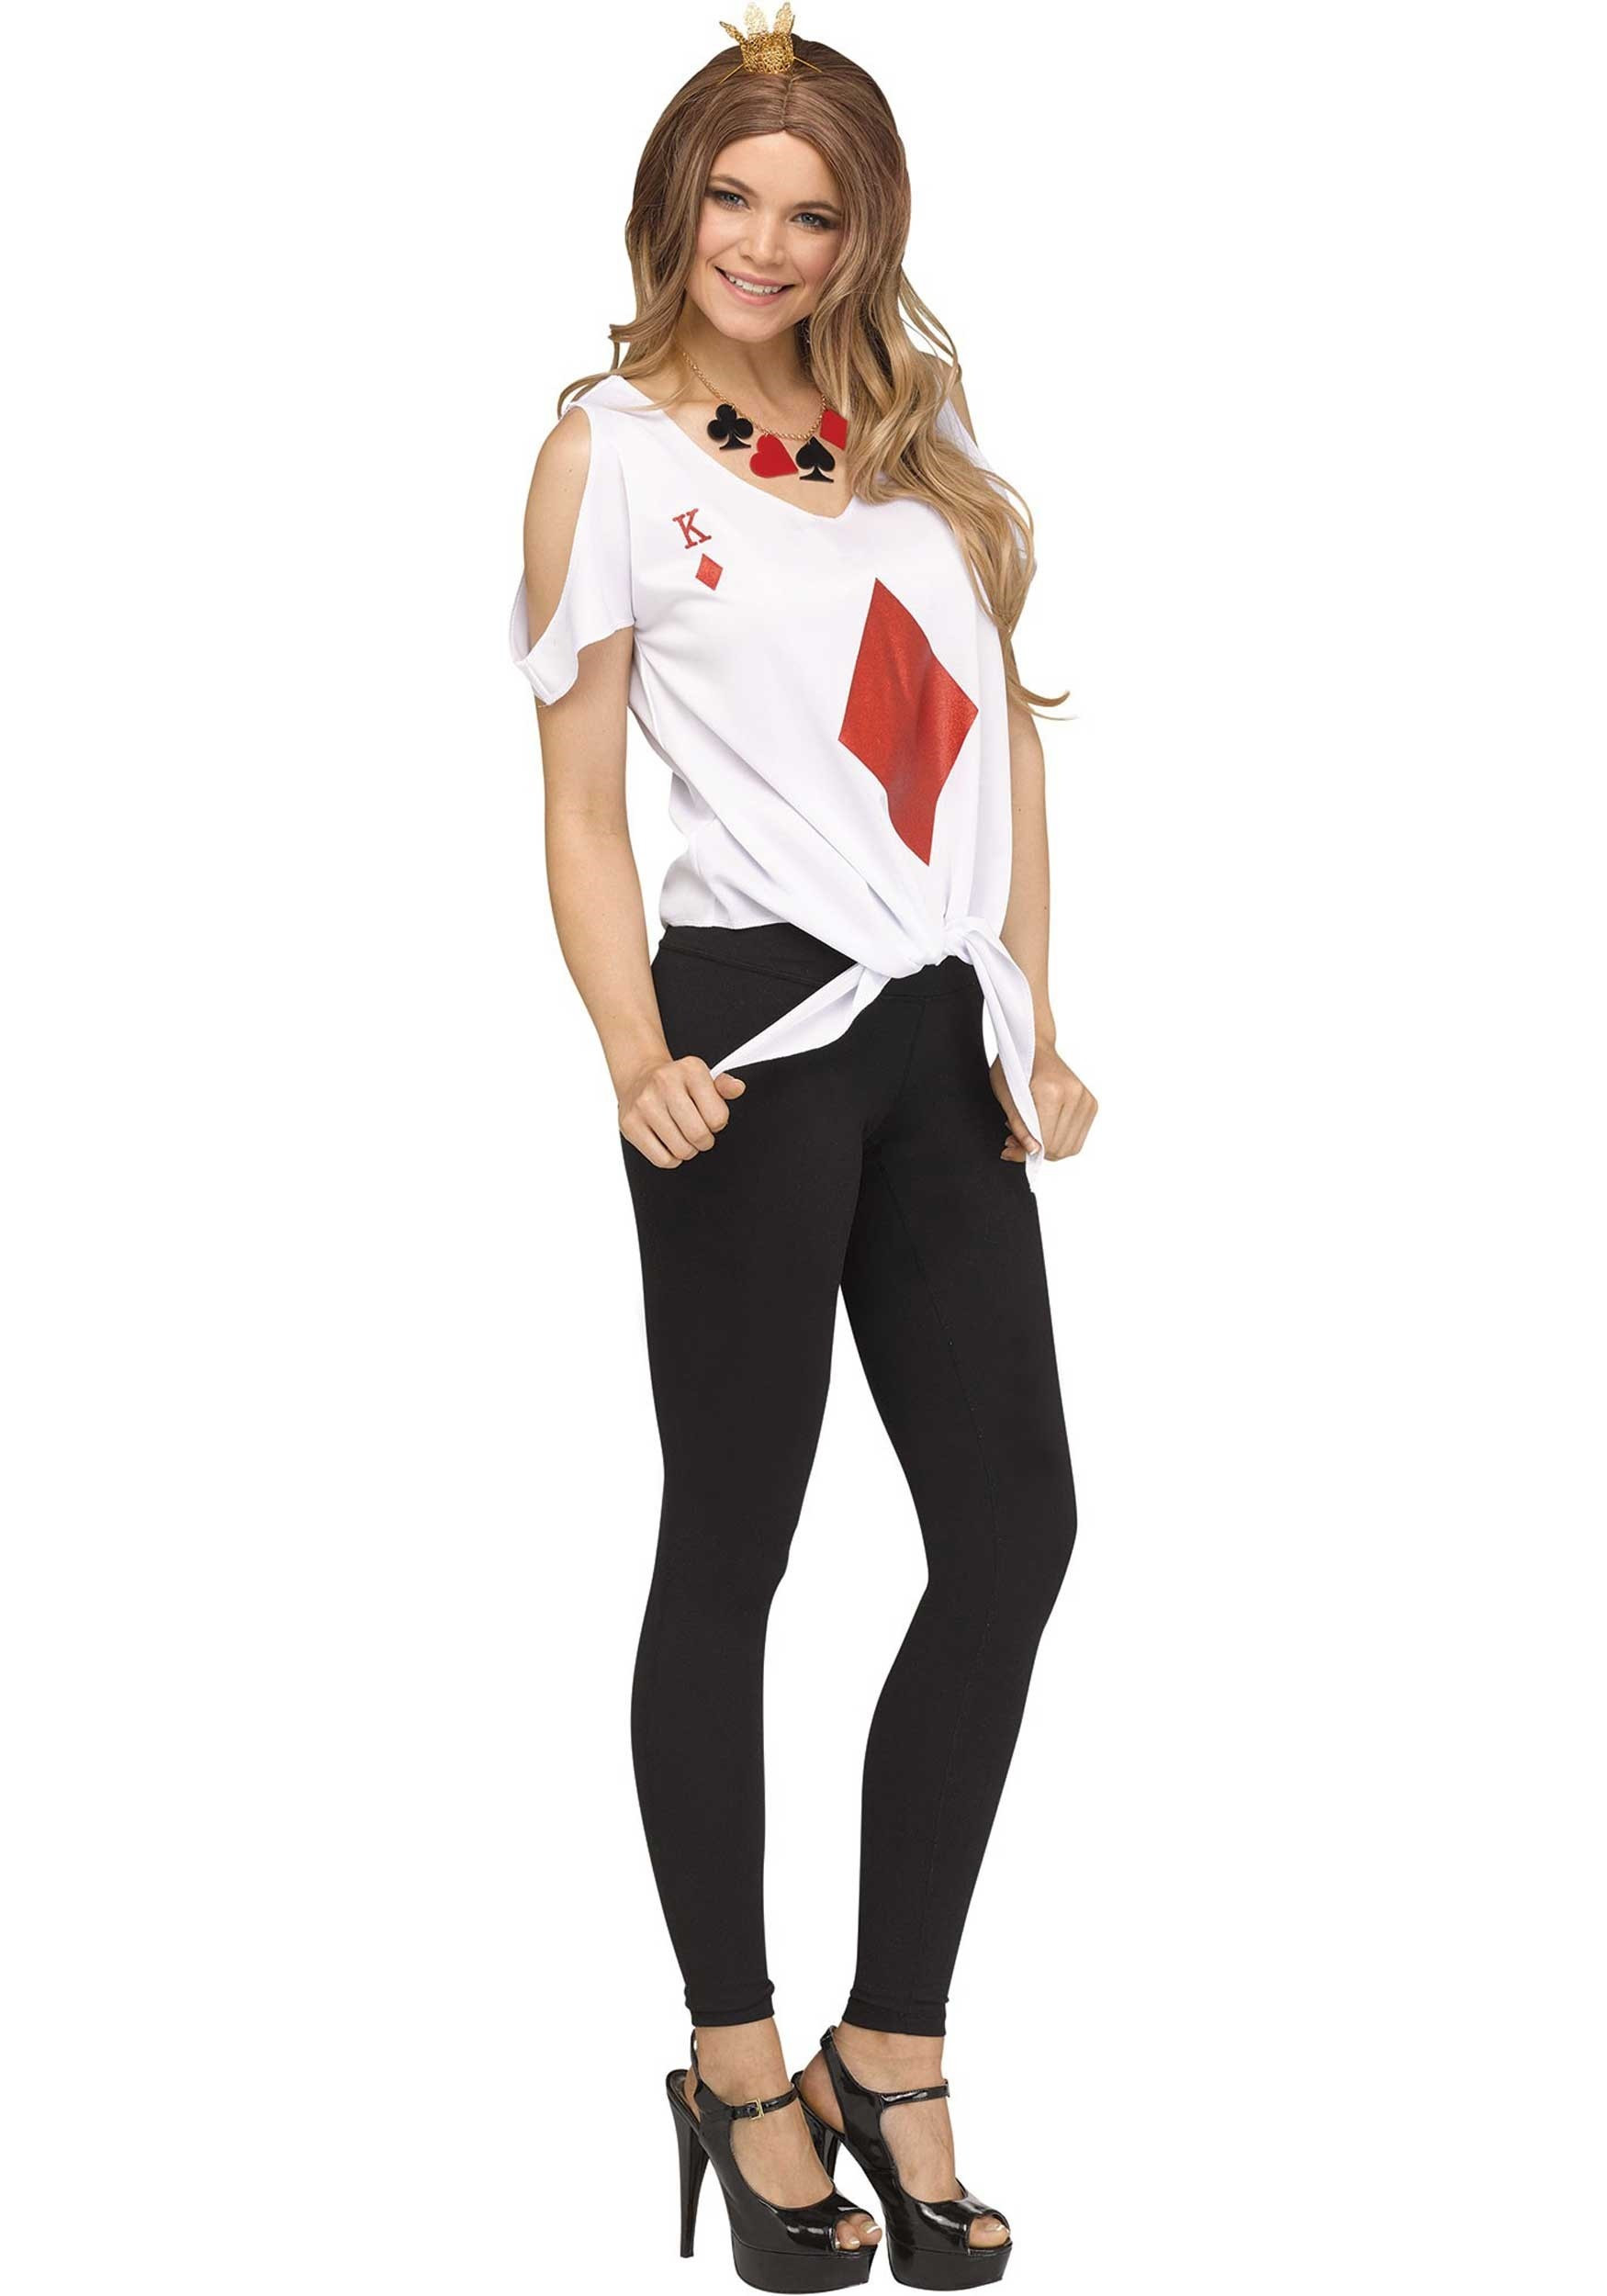 Deck Of Cards Halloween Costumes
 Deck of Cards Diamond Kit for Women